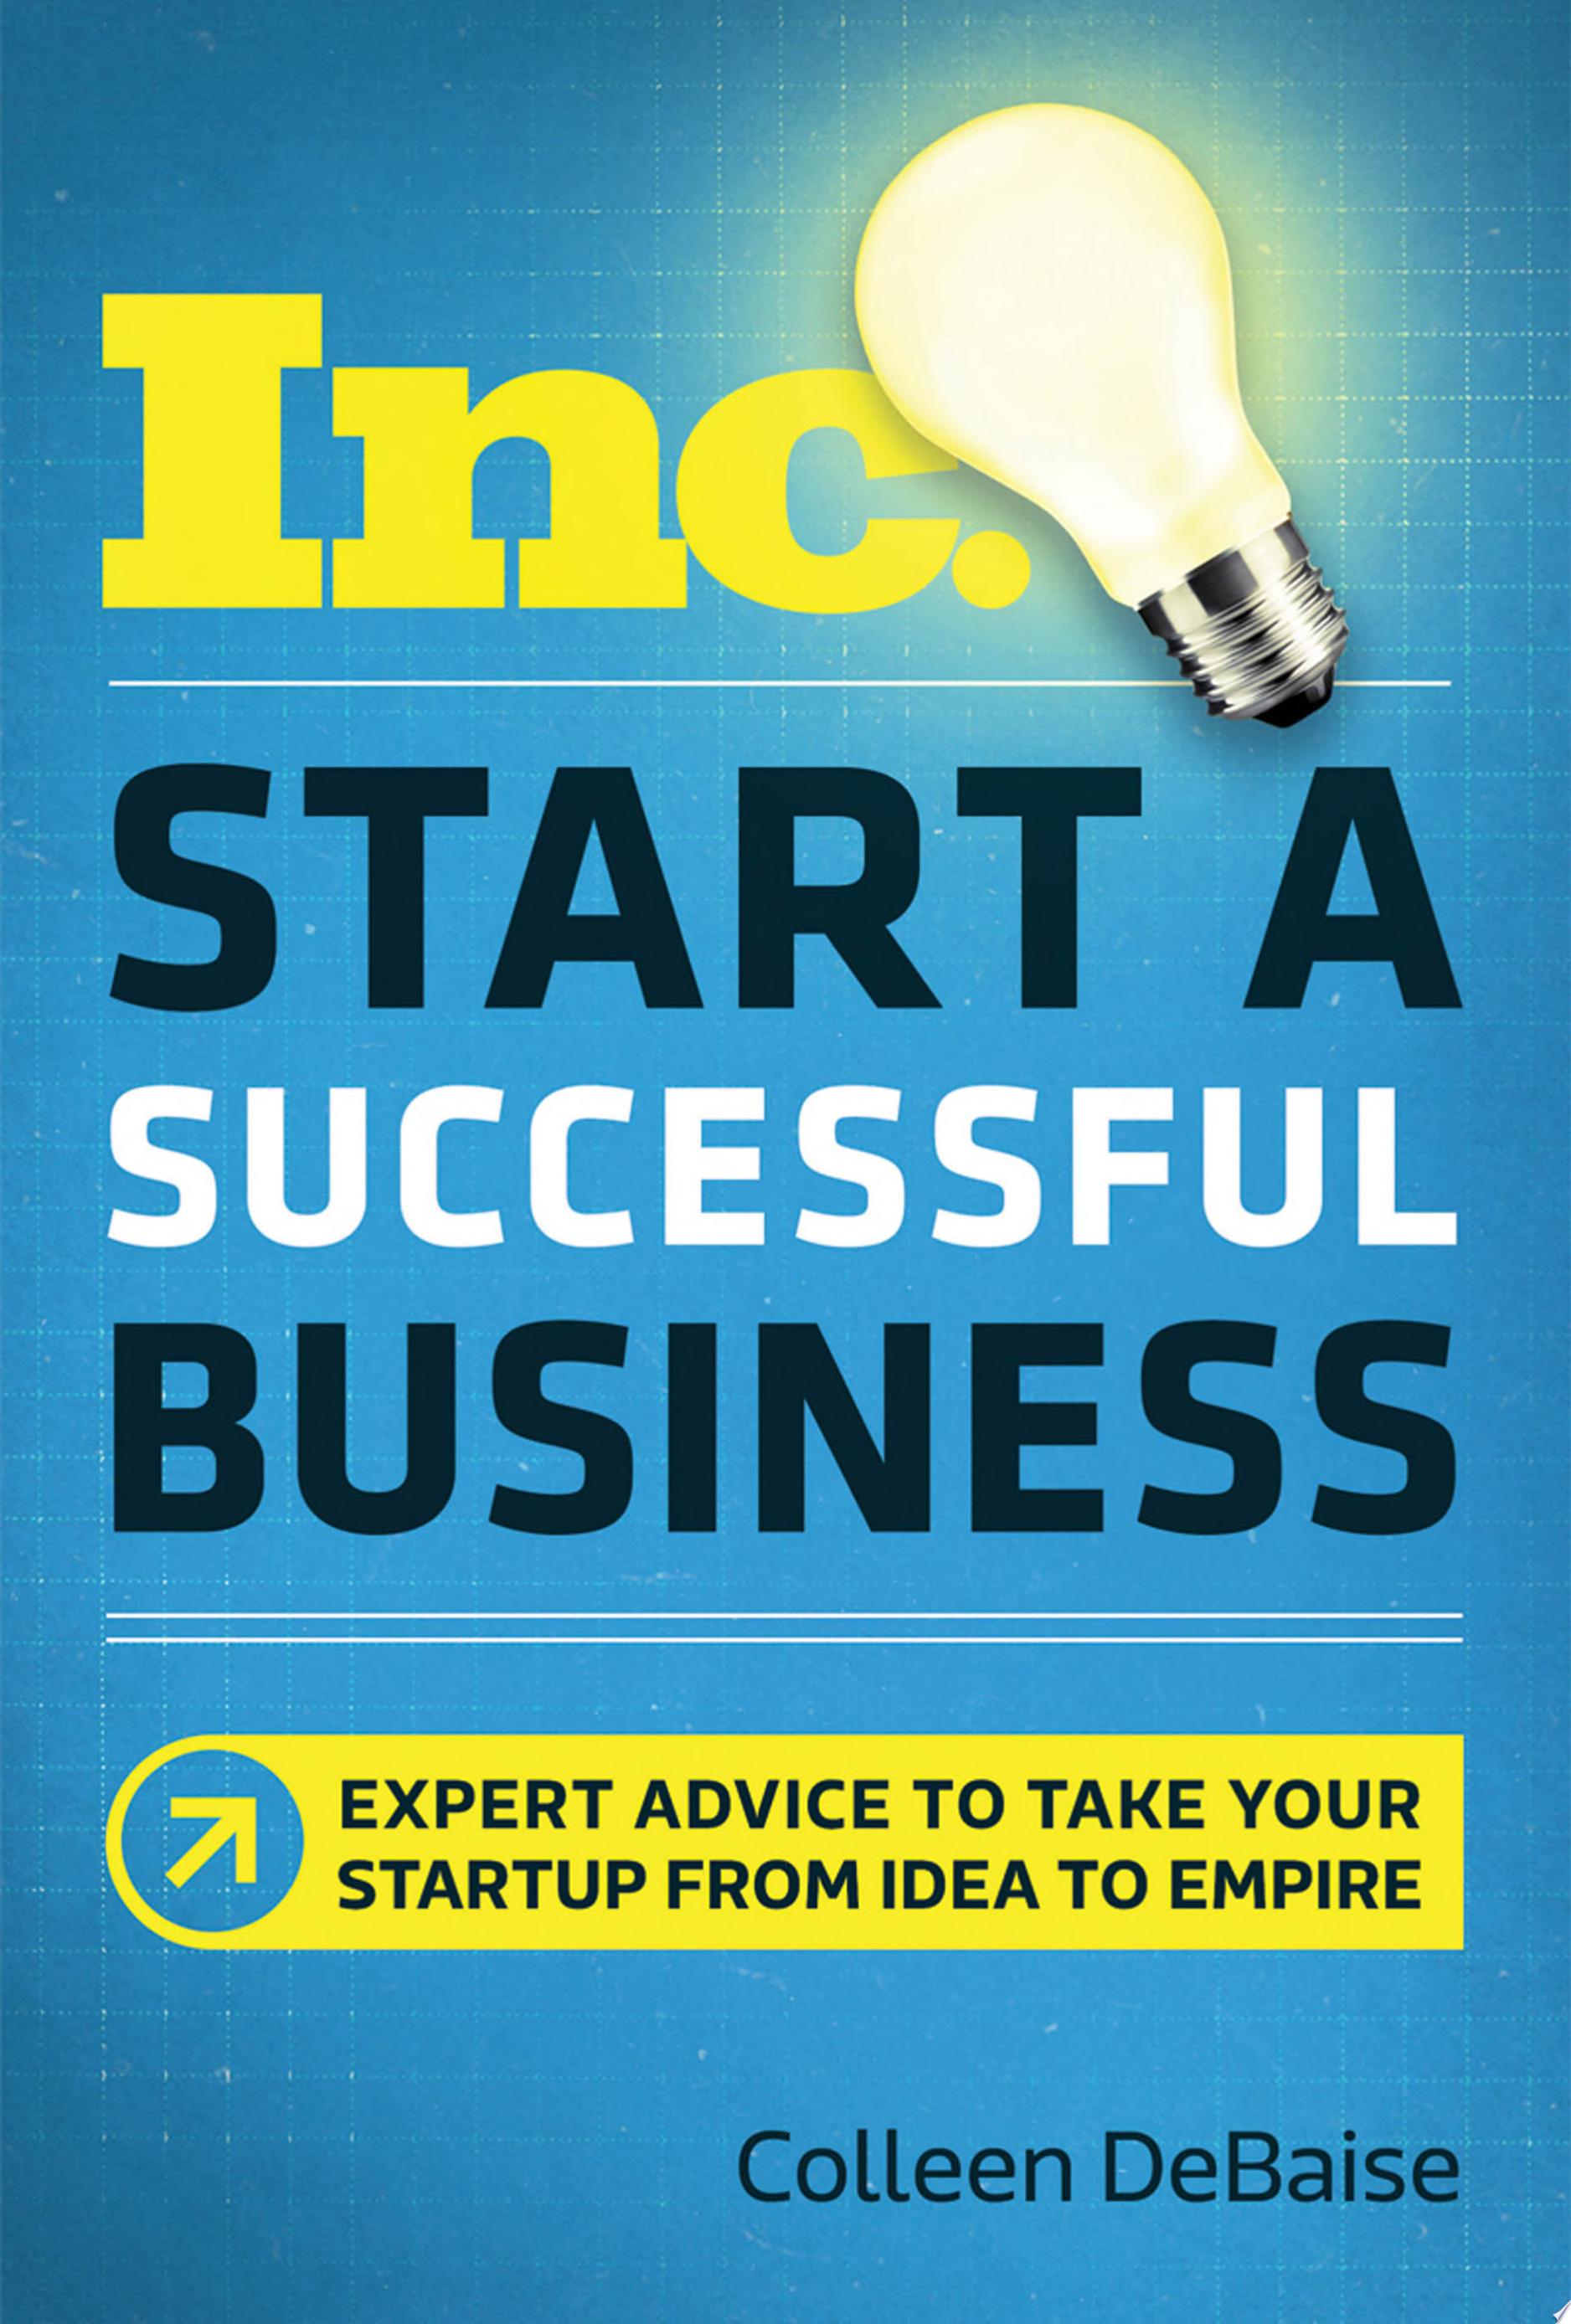 Image for "Start a Successful Business"